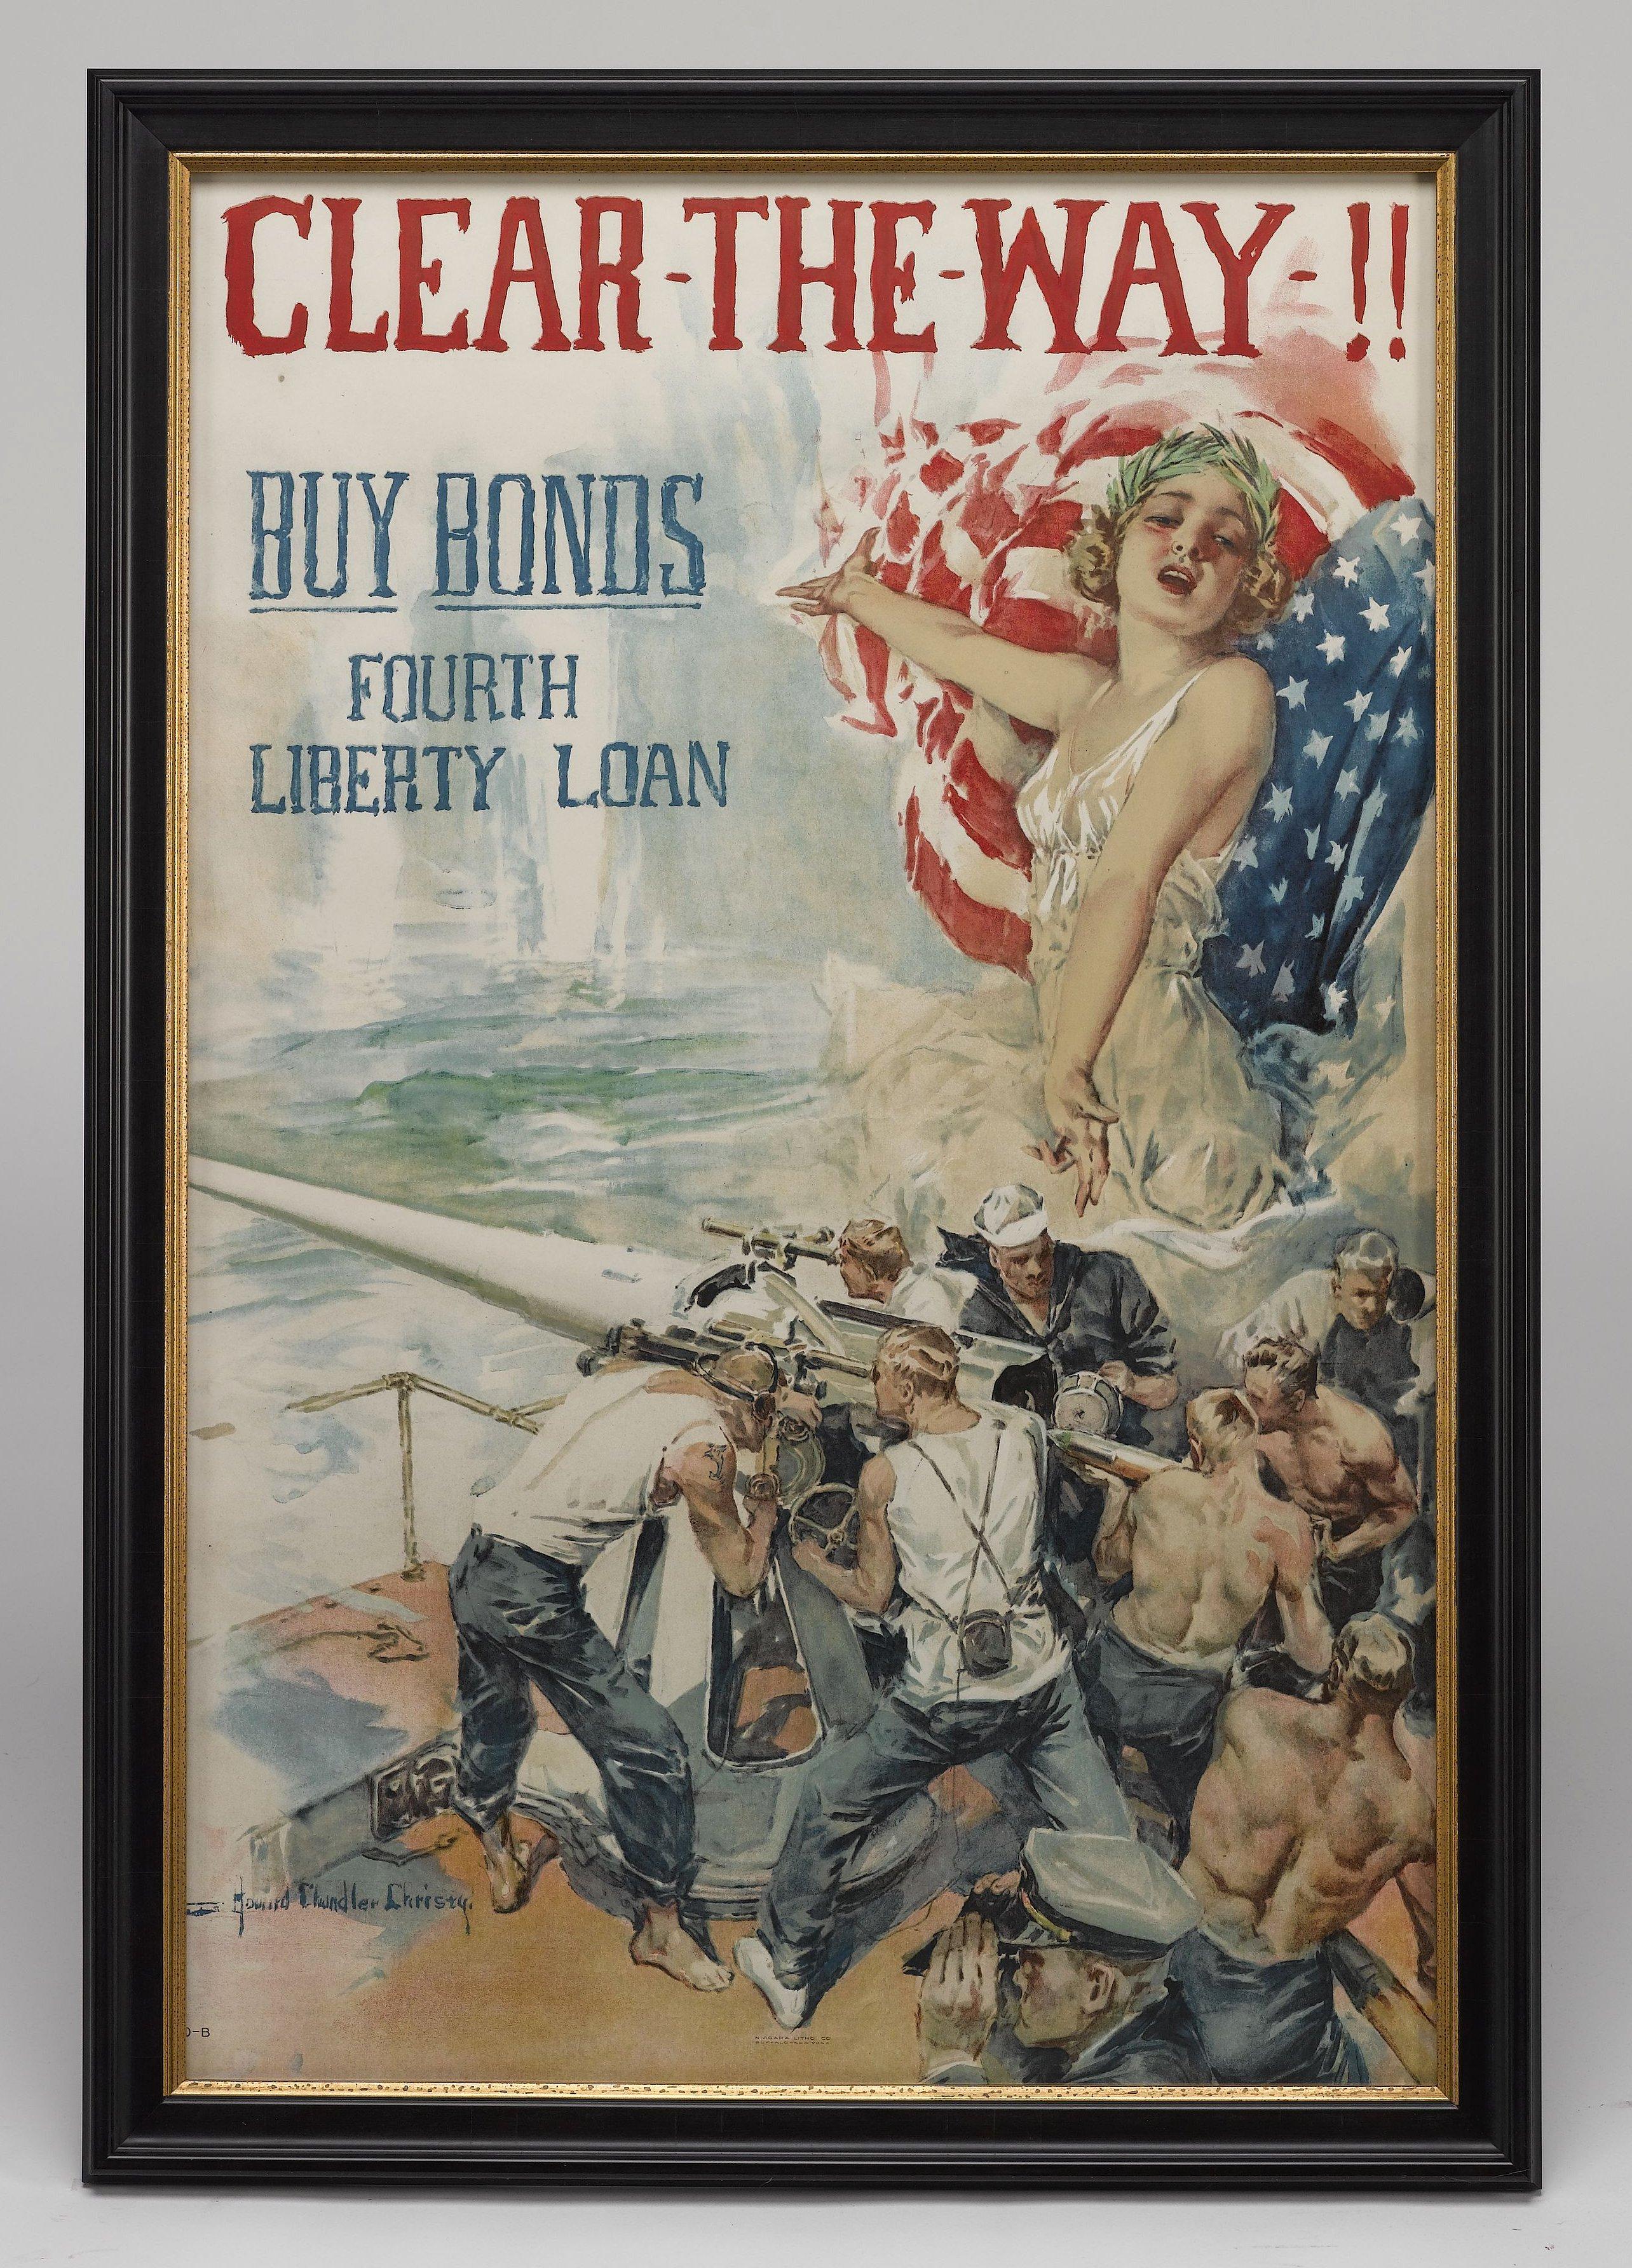 Presented is an original Howard Chandler Christy poster from 1919 entitled 